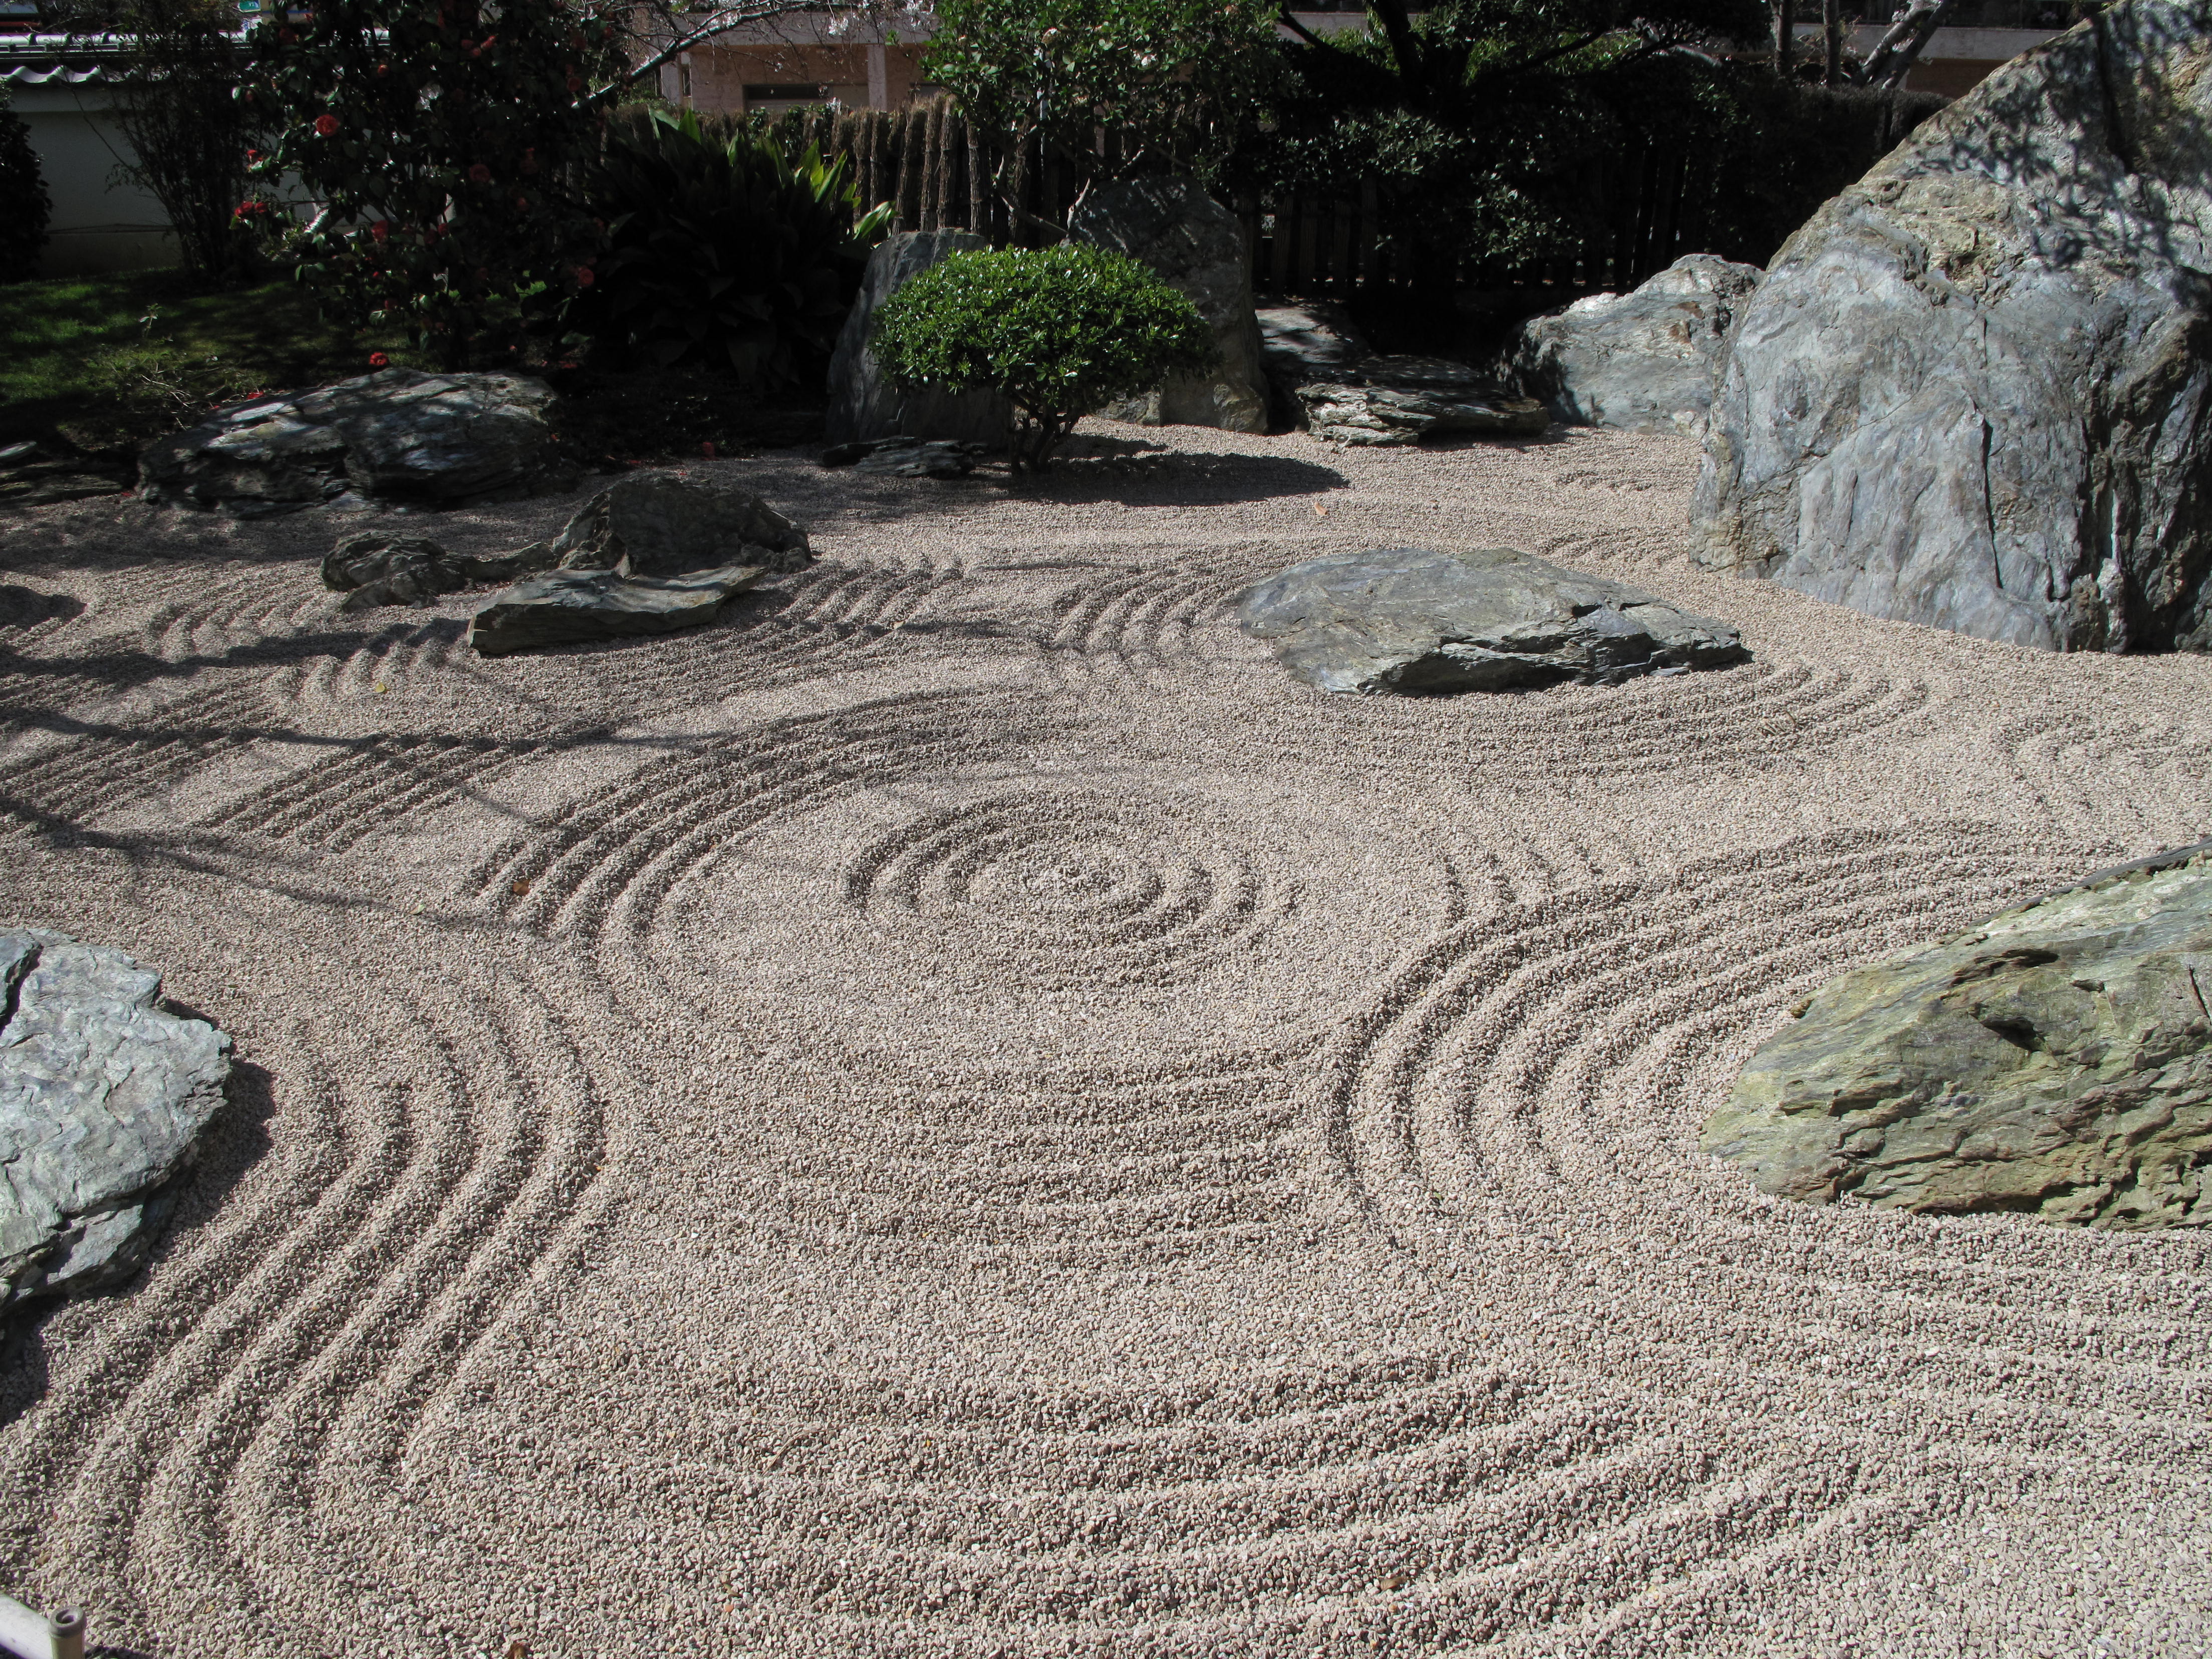 A zen garden of rocks and shrubs surrounding sand that has been spread out in pretty, swirly patterns